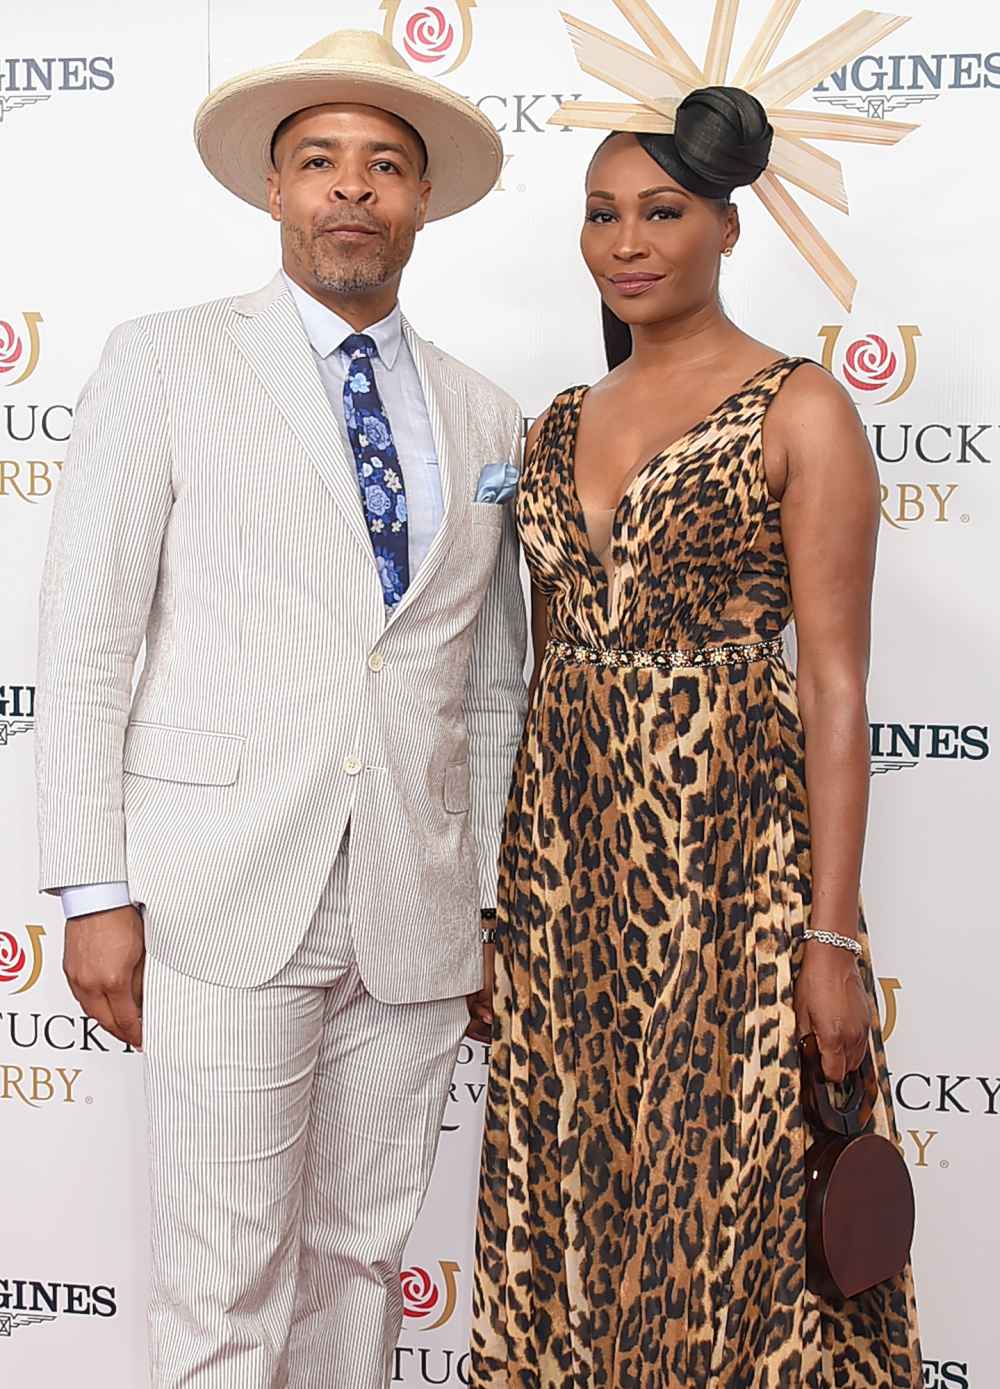 Cynthia Bailey Confirms Her Wedding to Mike Hill Will Be Filmed for 'Real Housewives of Atlanta'